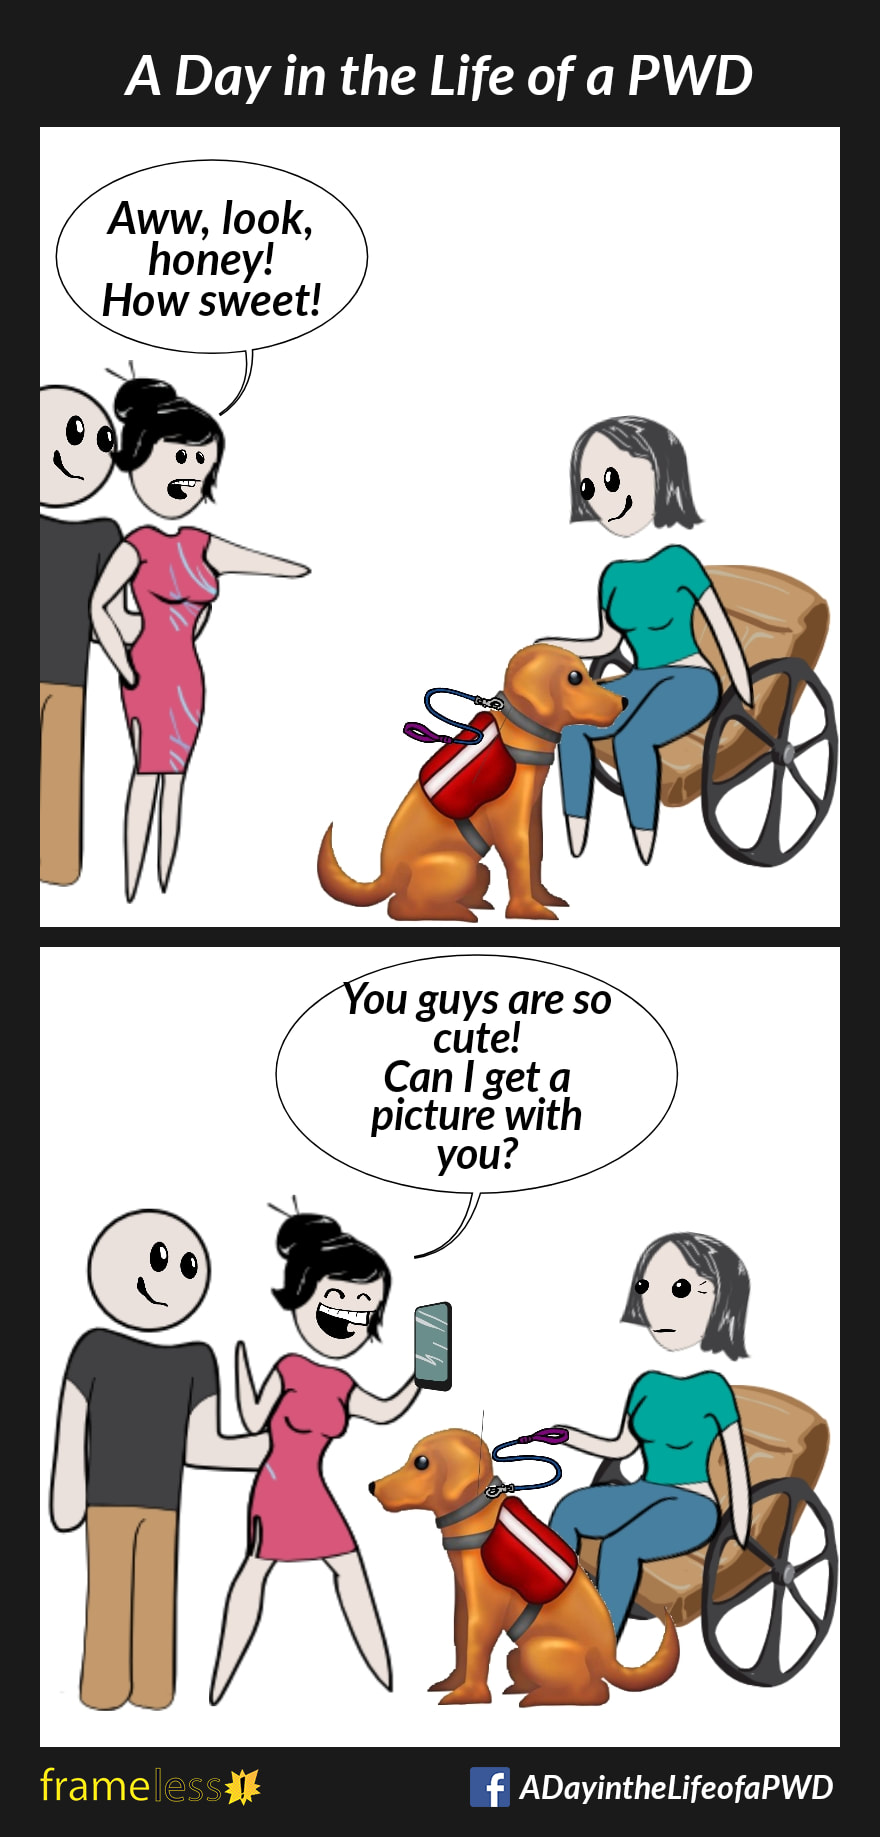 COMIC STRIP 
A Day in the Life of a PWD (Person With a Disability) 

Frame 1:
A woman in a wheelchair is with her service dog.
A stranger and her husband approach them.
STRANGER: Aww, look, honey! How sweet!

Frame 2:
The stranger pulls out her cell phone.
STRANGER (to woman): You guys are so cute! Can I get a picture with you?